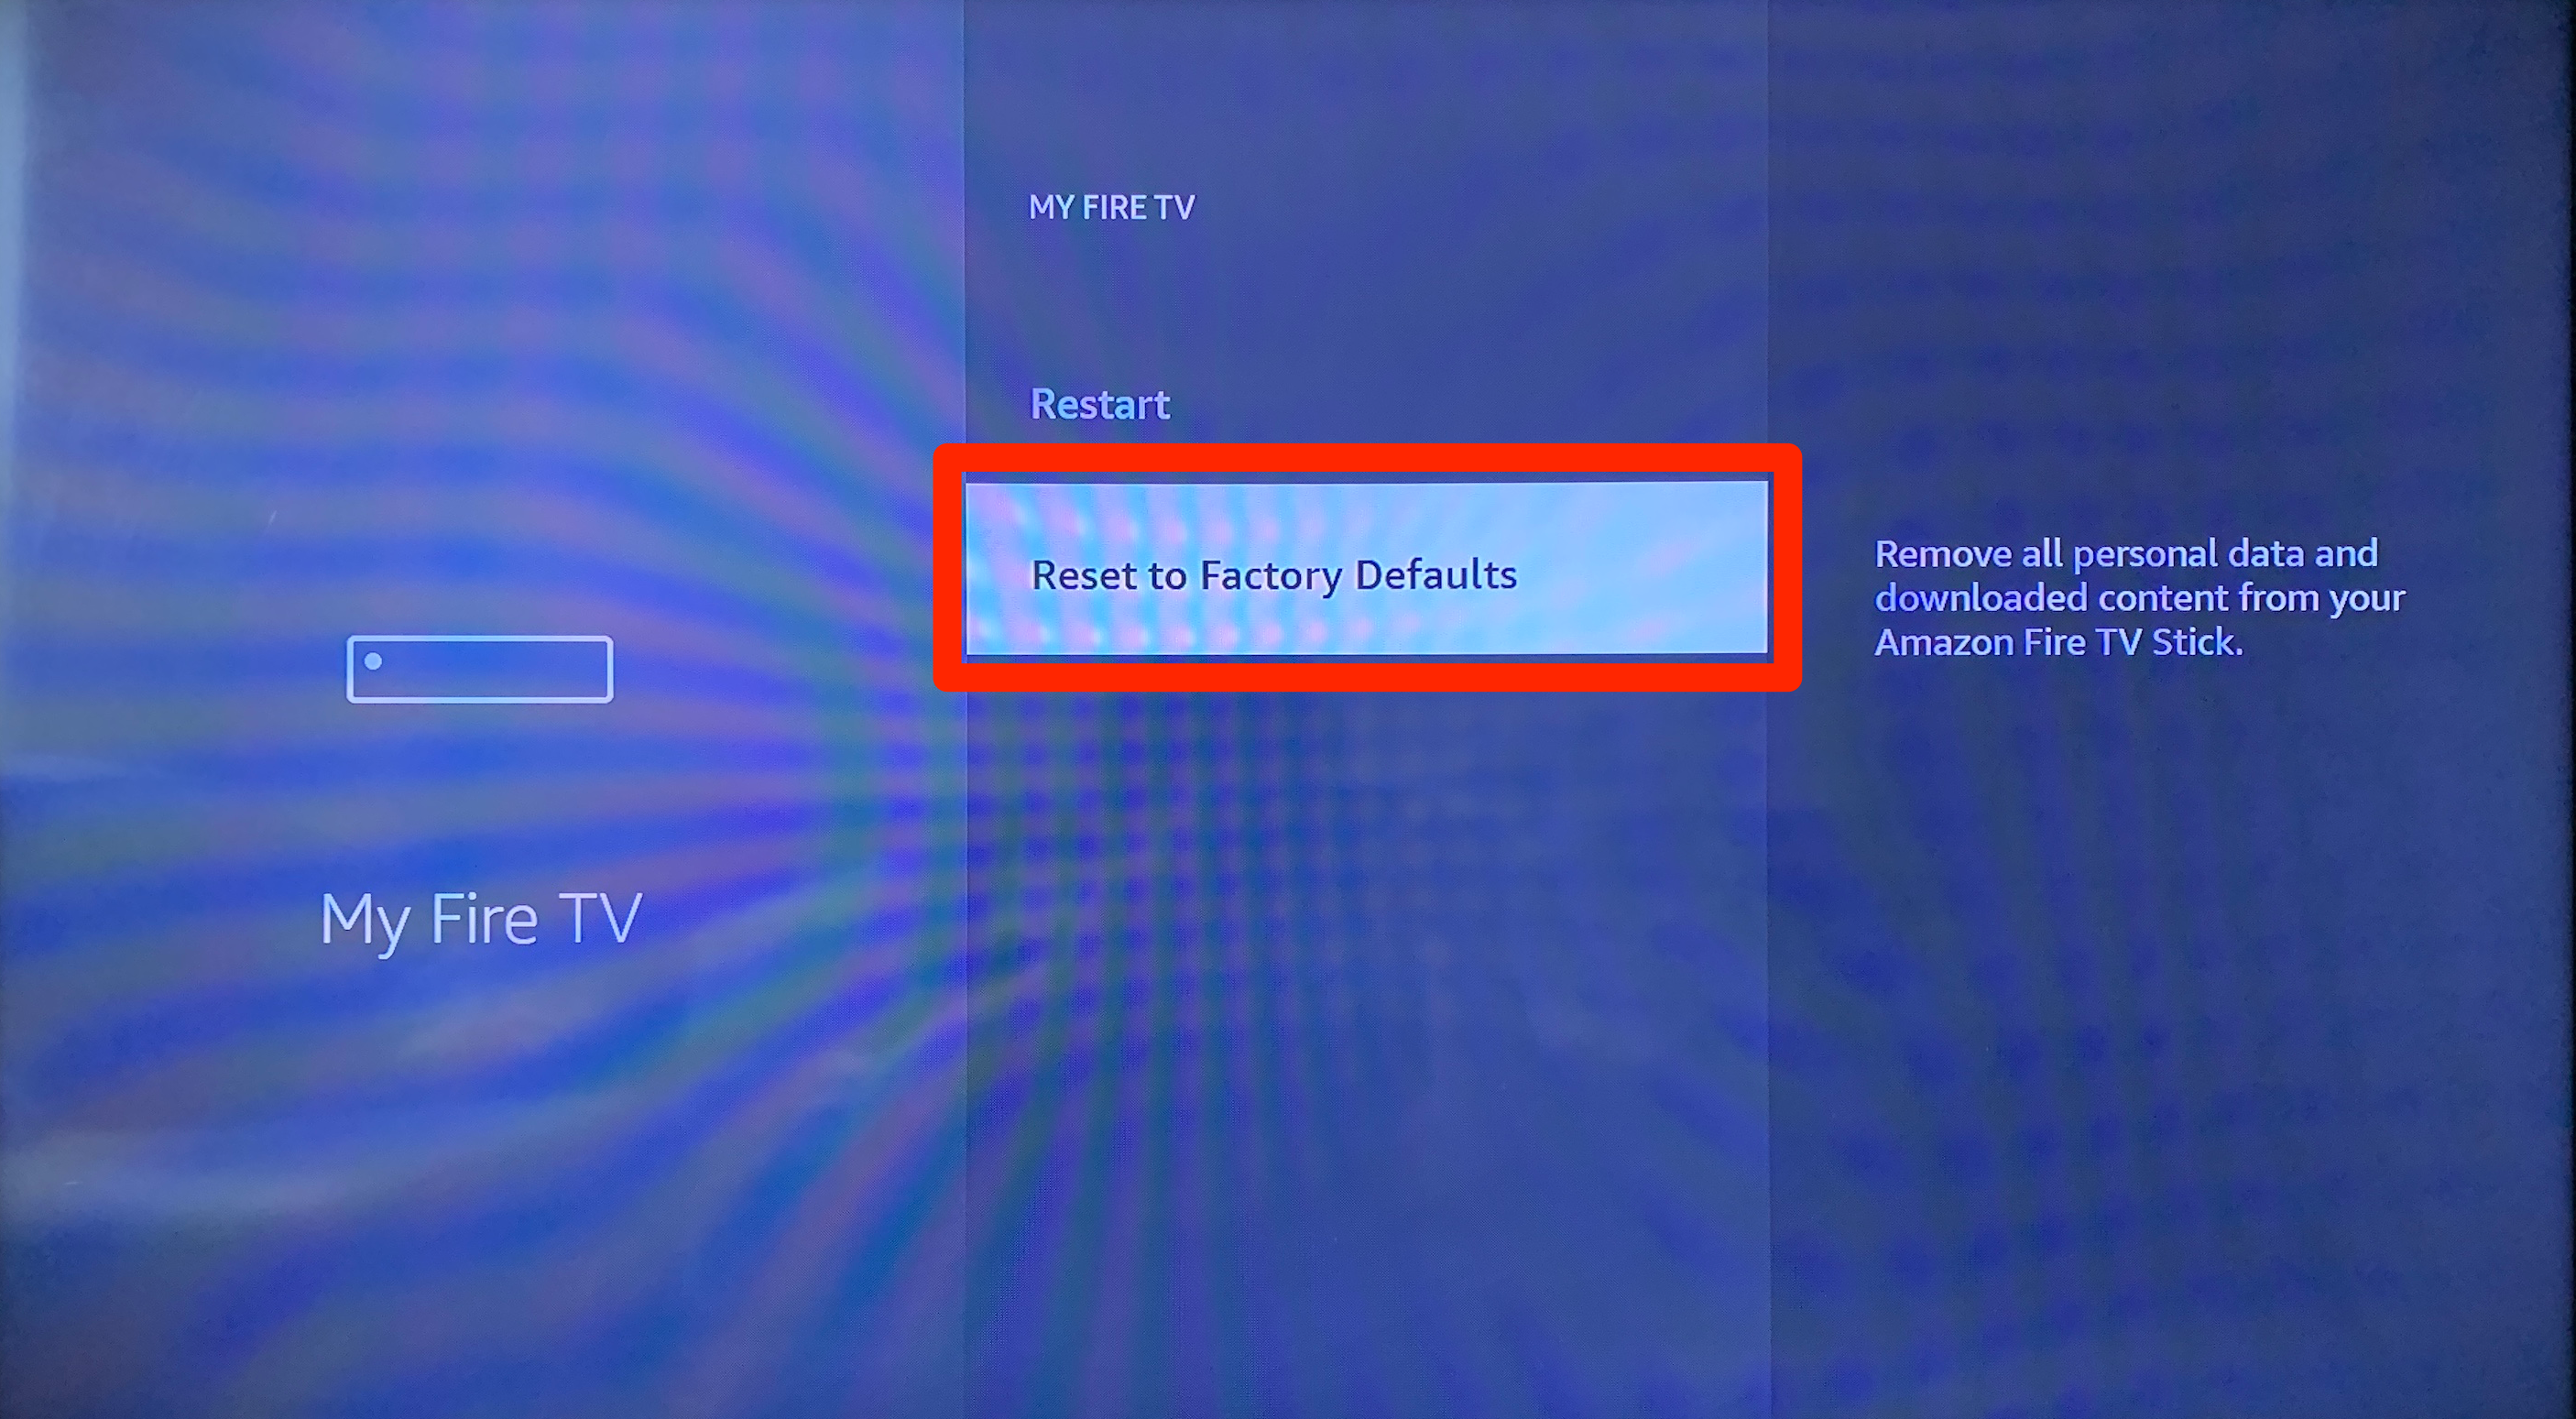 The My Fire TV menu on an Amazon Firestick, with the "Reset to Factory Settings" option highlighted.